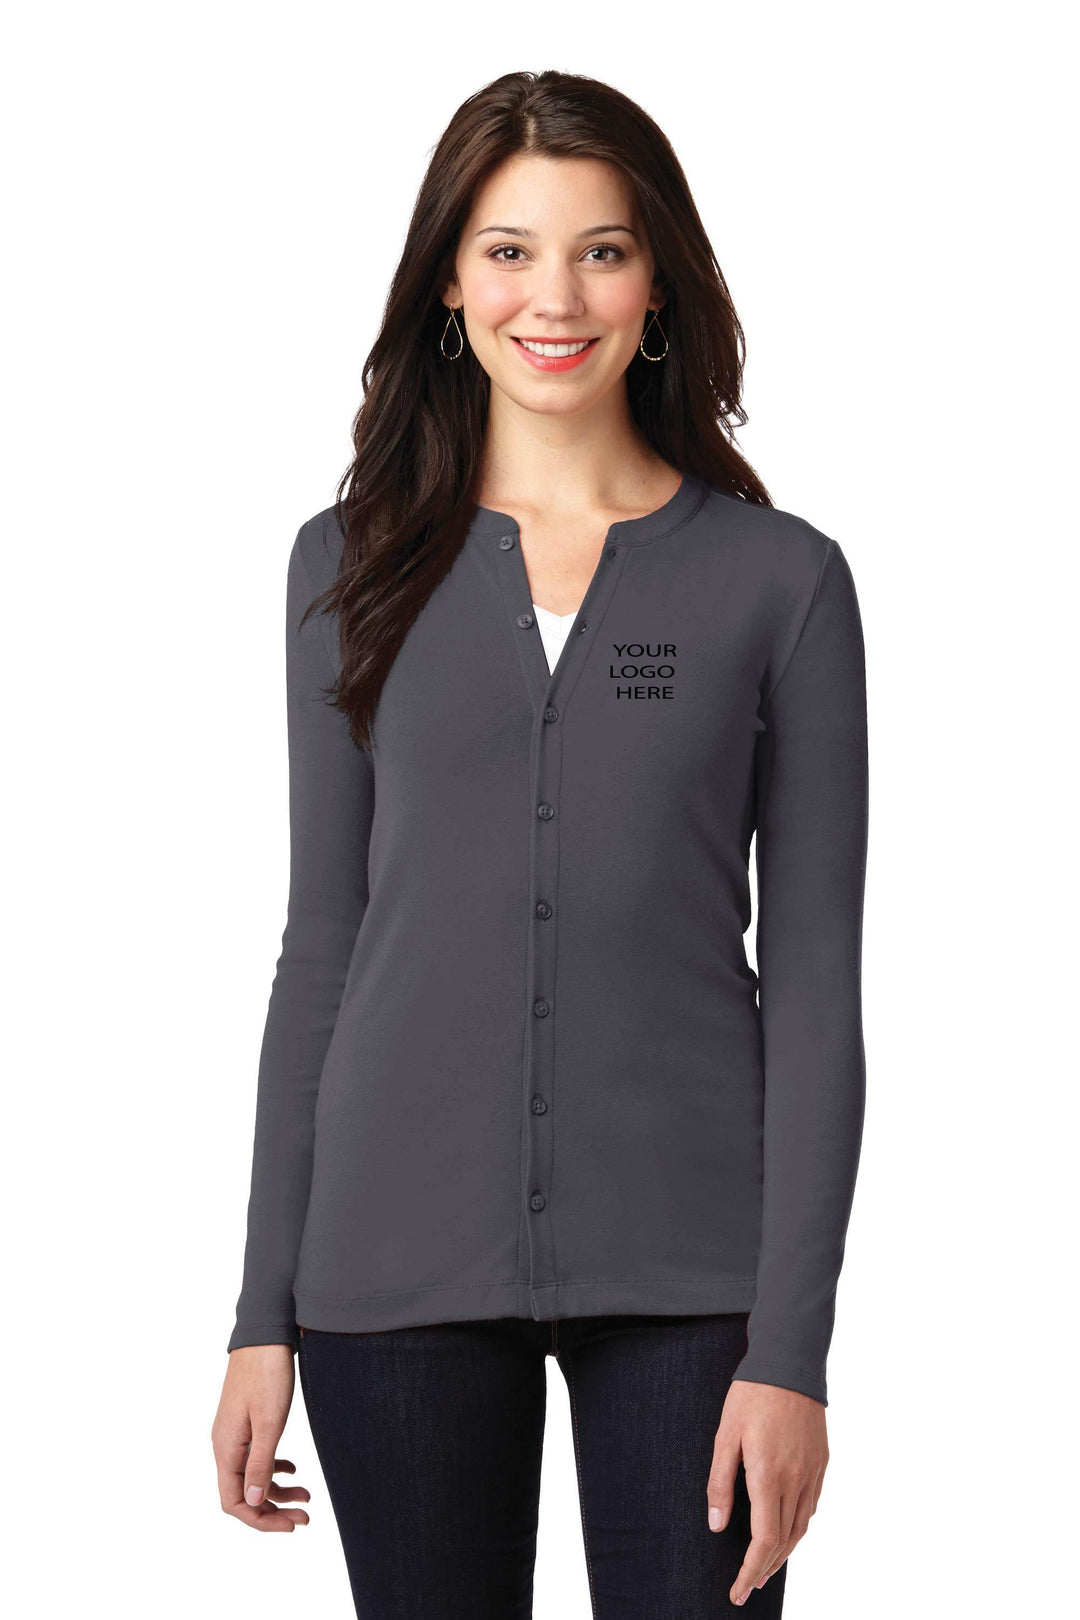 Keller Williams KW-SMLM1008 PA Ladies Concept Stretch Button-Front Cardigan 